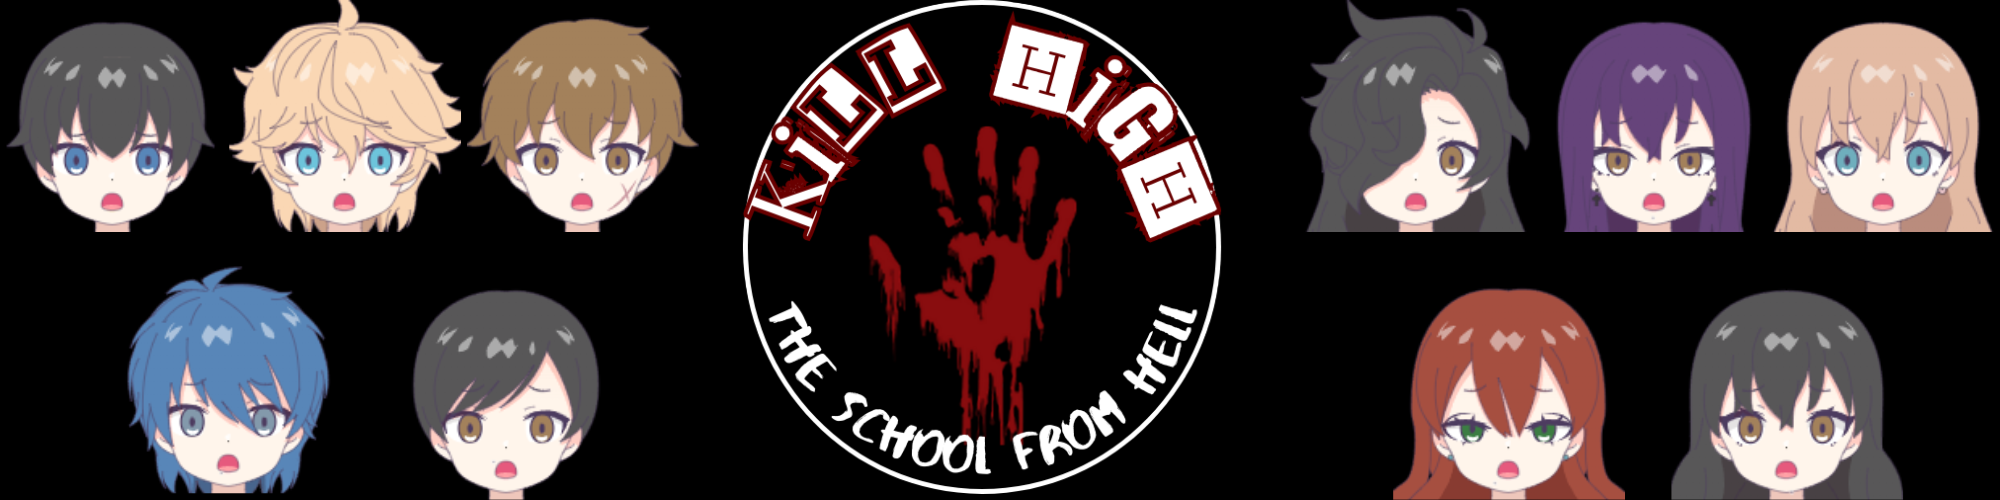 Kill High: The School From Hell